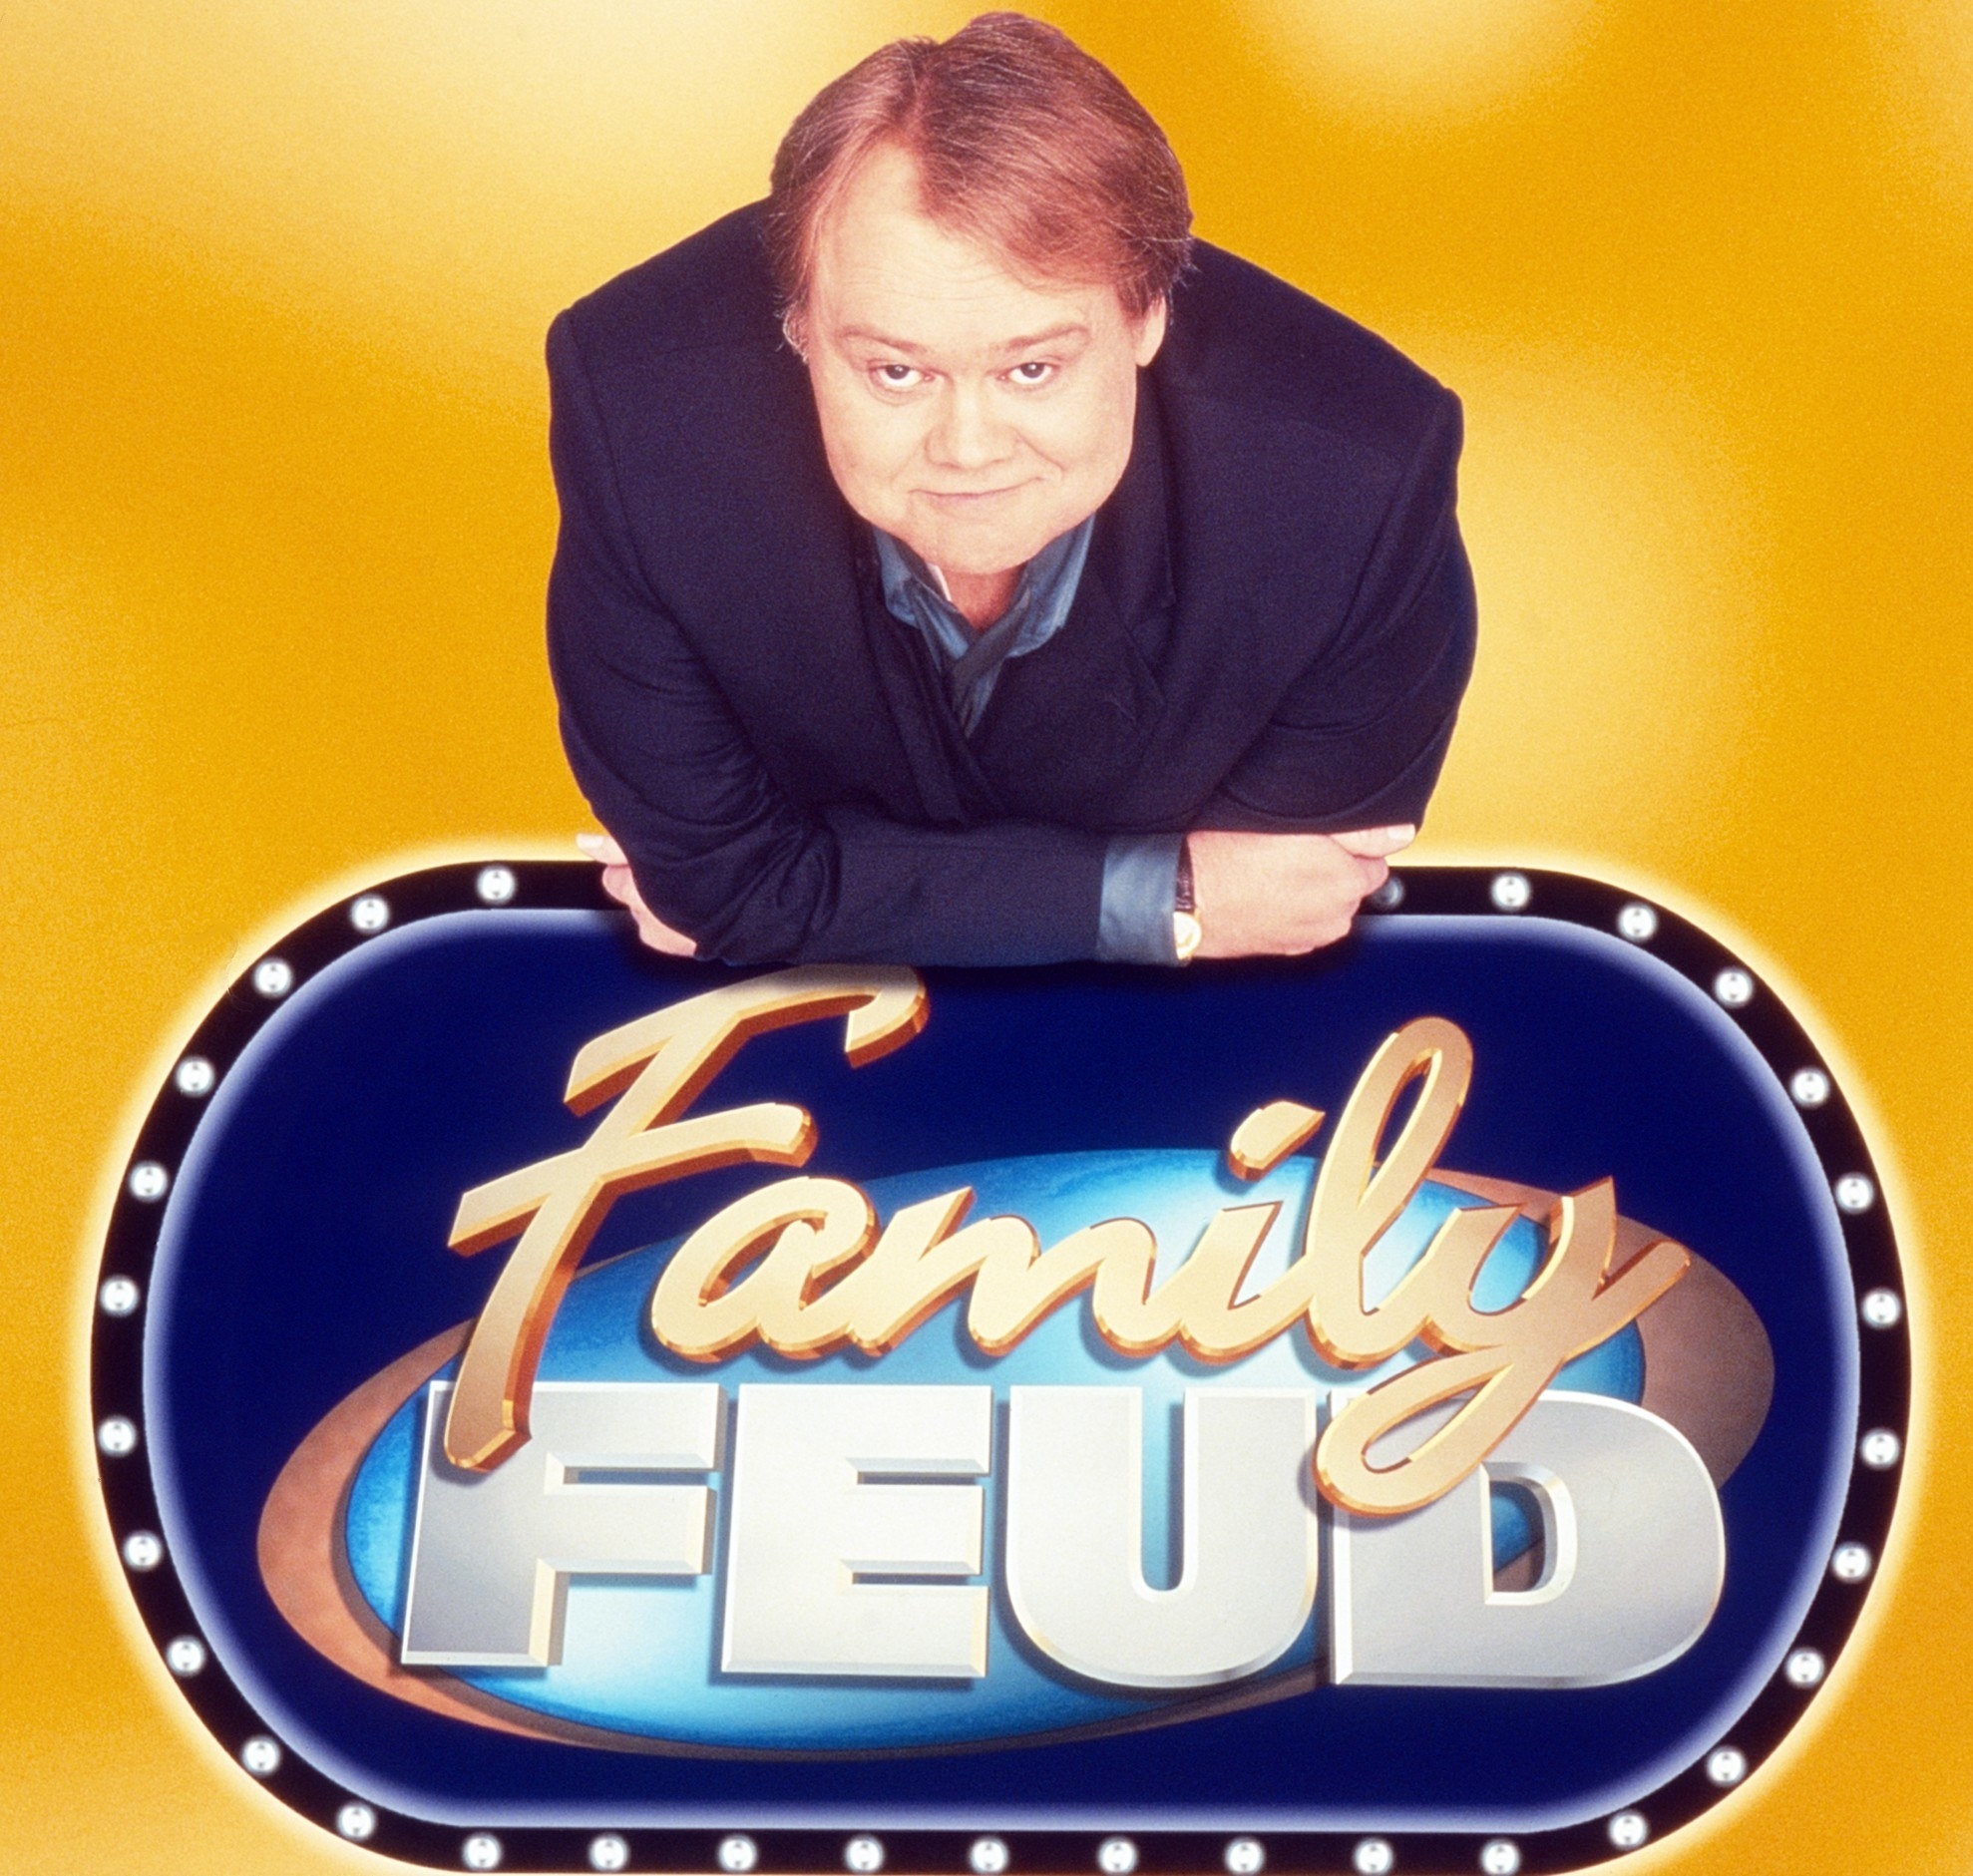 Louie Anderson leaning on a Family Feud logo